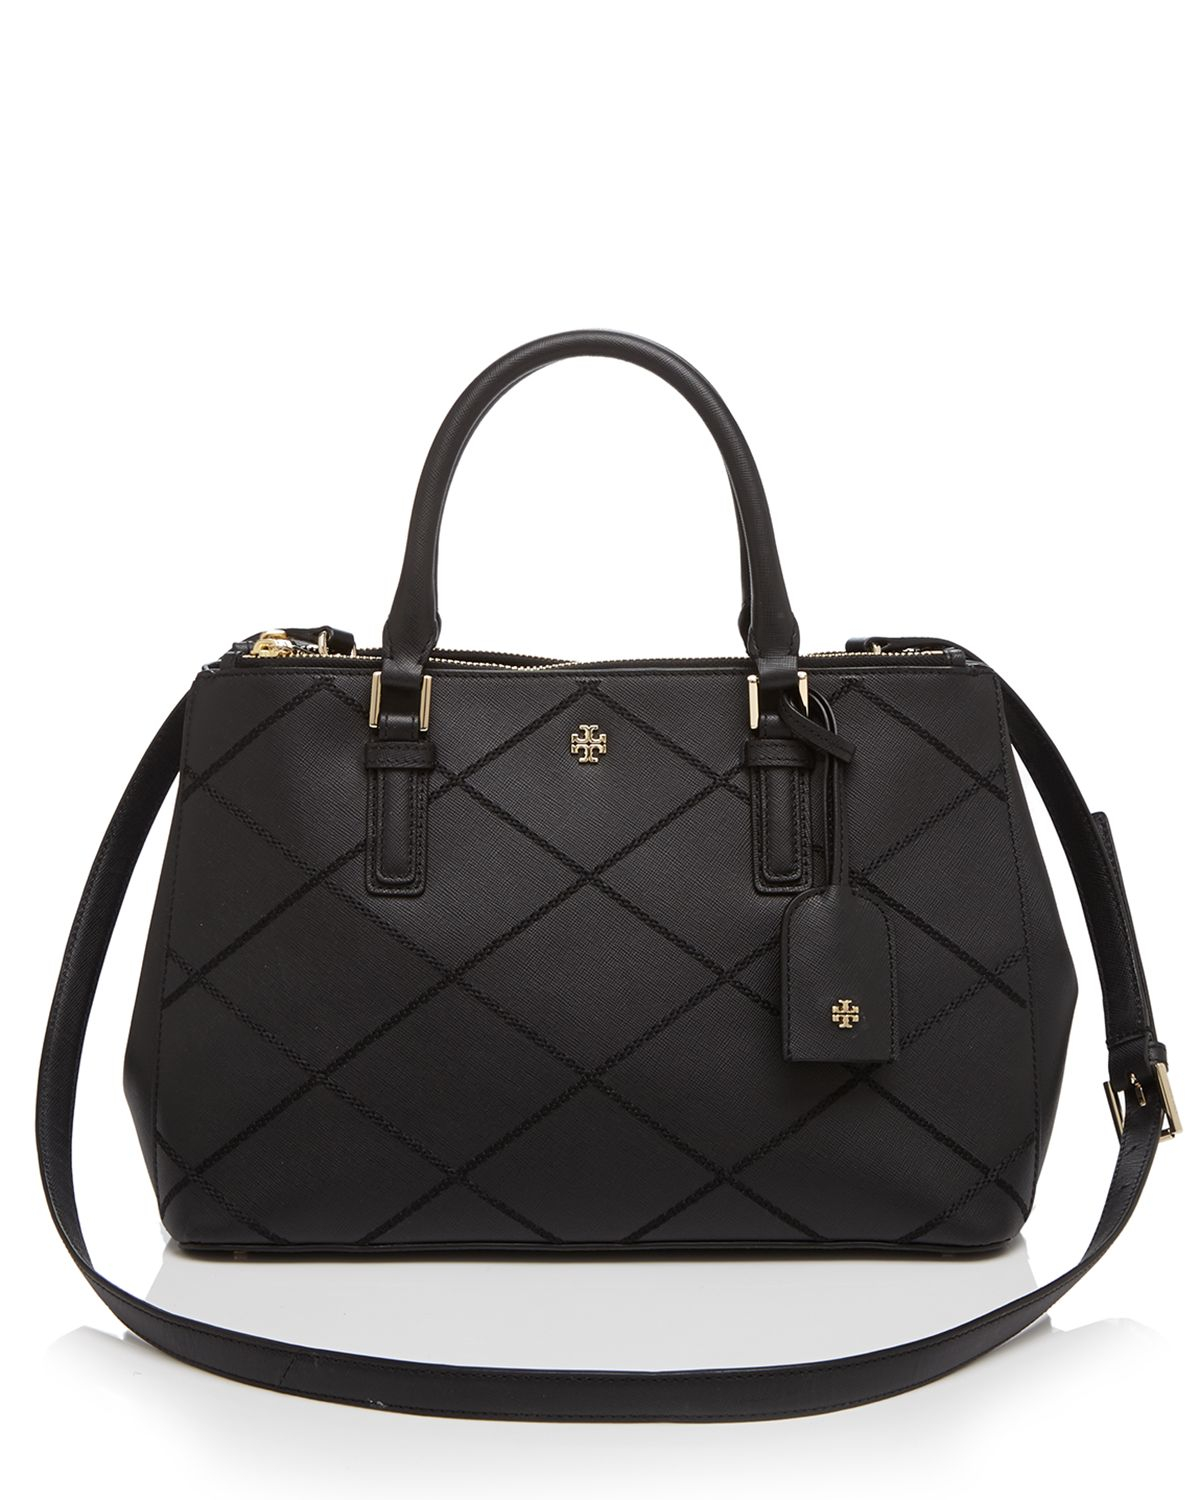 Tory Burch Tote - Robinson Stitched Mini Double-Zip in Black - Lyst